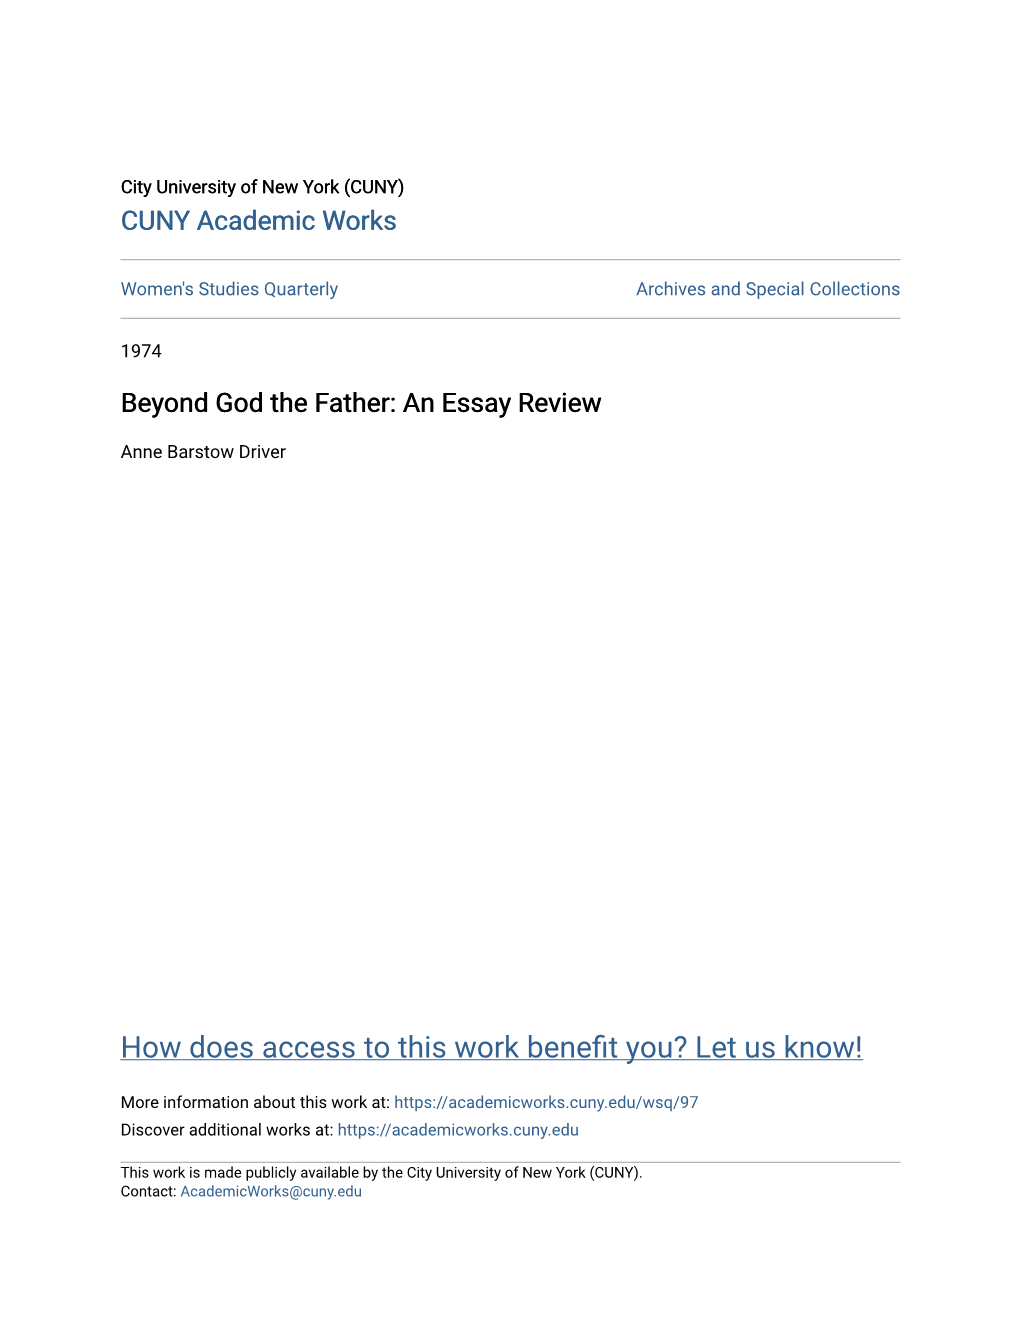 Beyond God the Father: an Essay Review